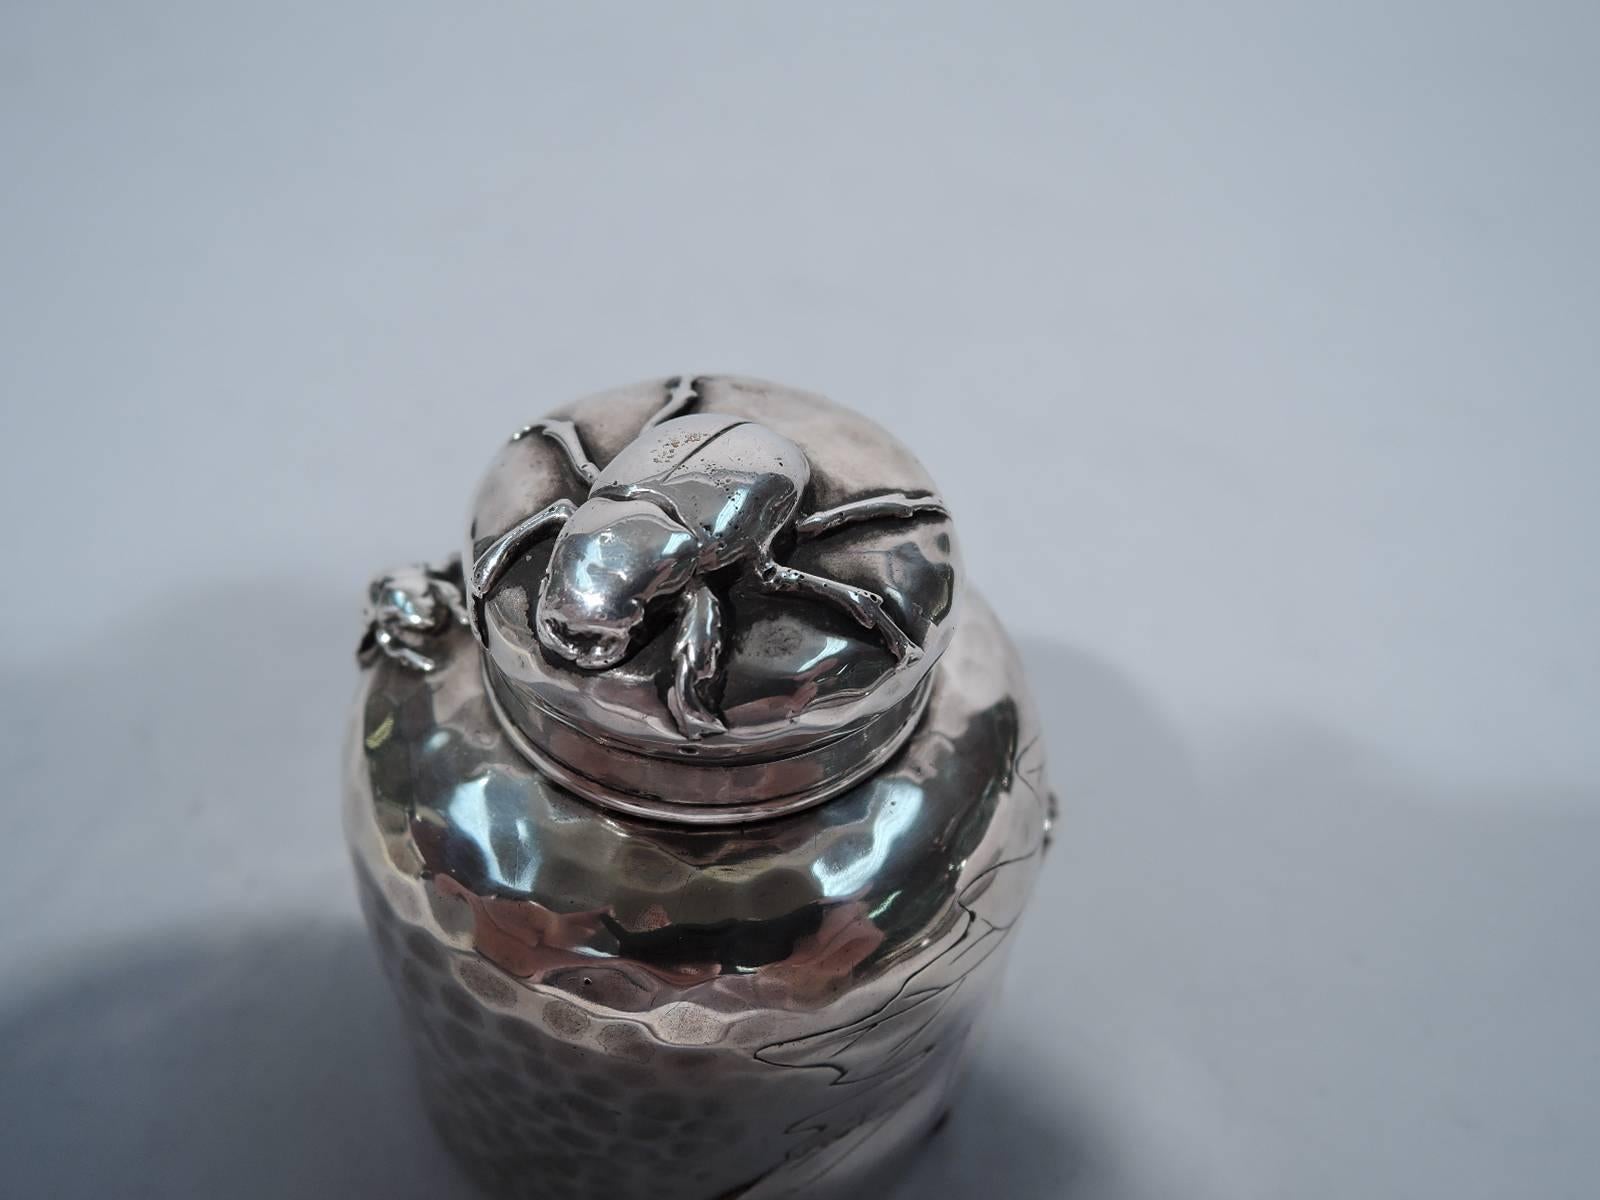 American Rare Tiffany Hand-Hammered and Applied Silver Inkwell with Bugs